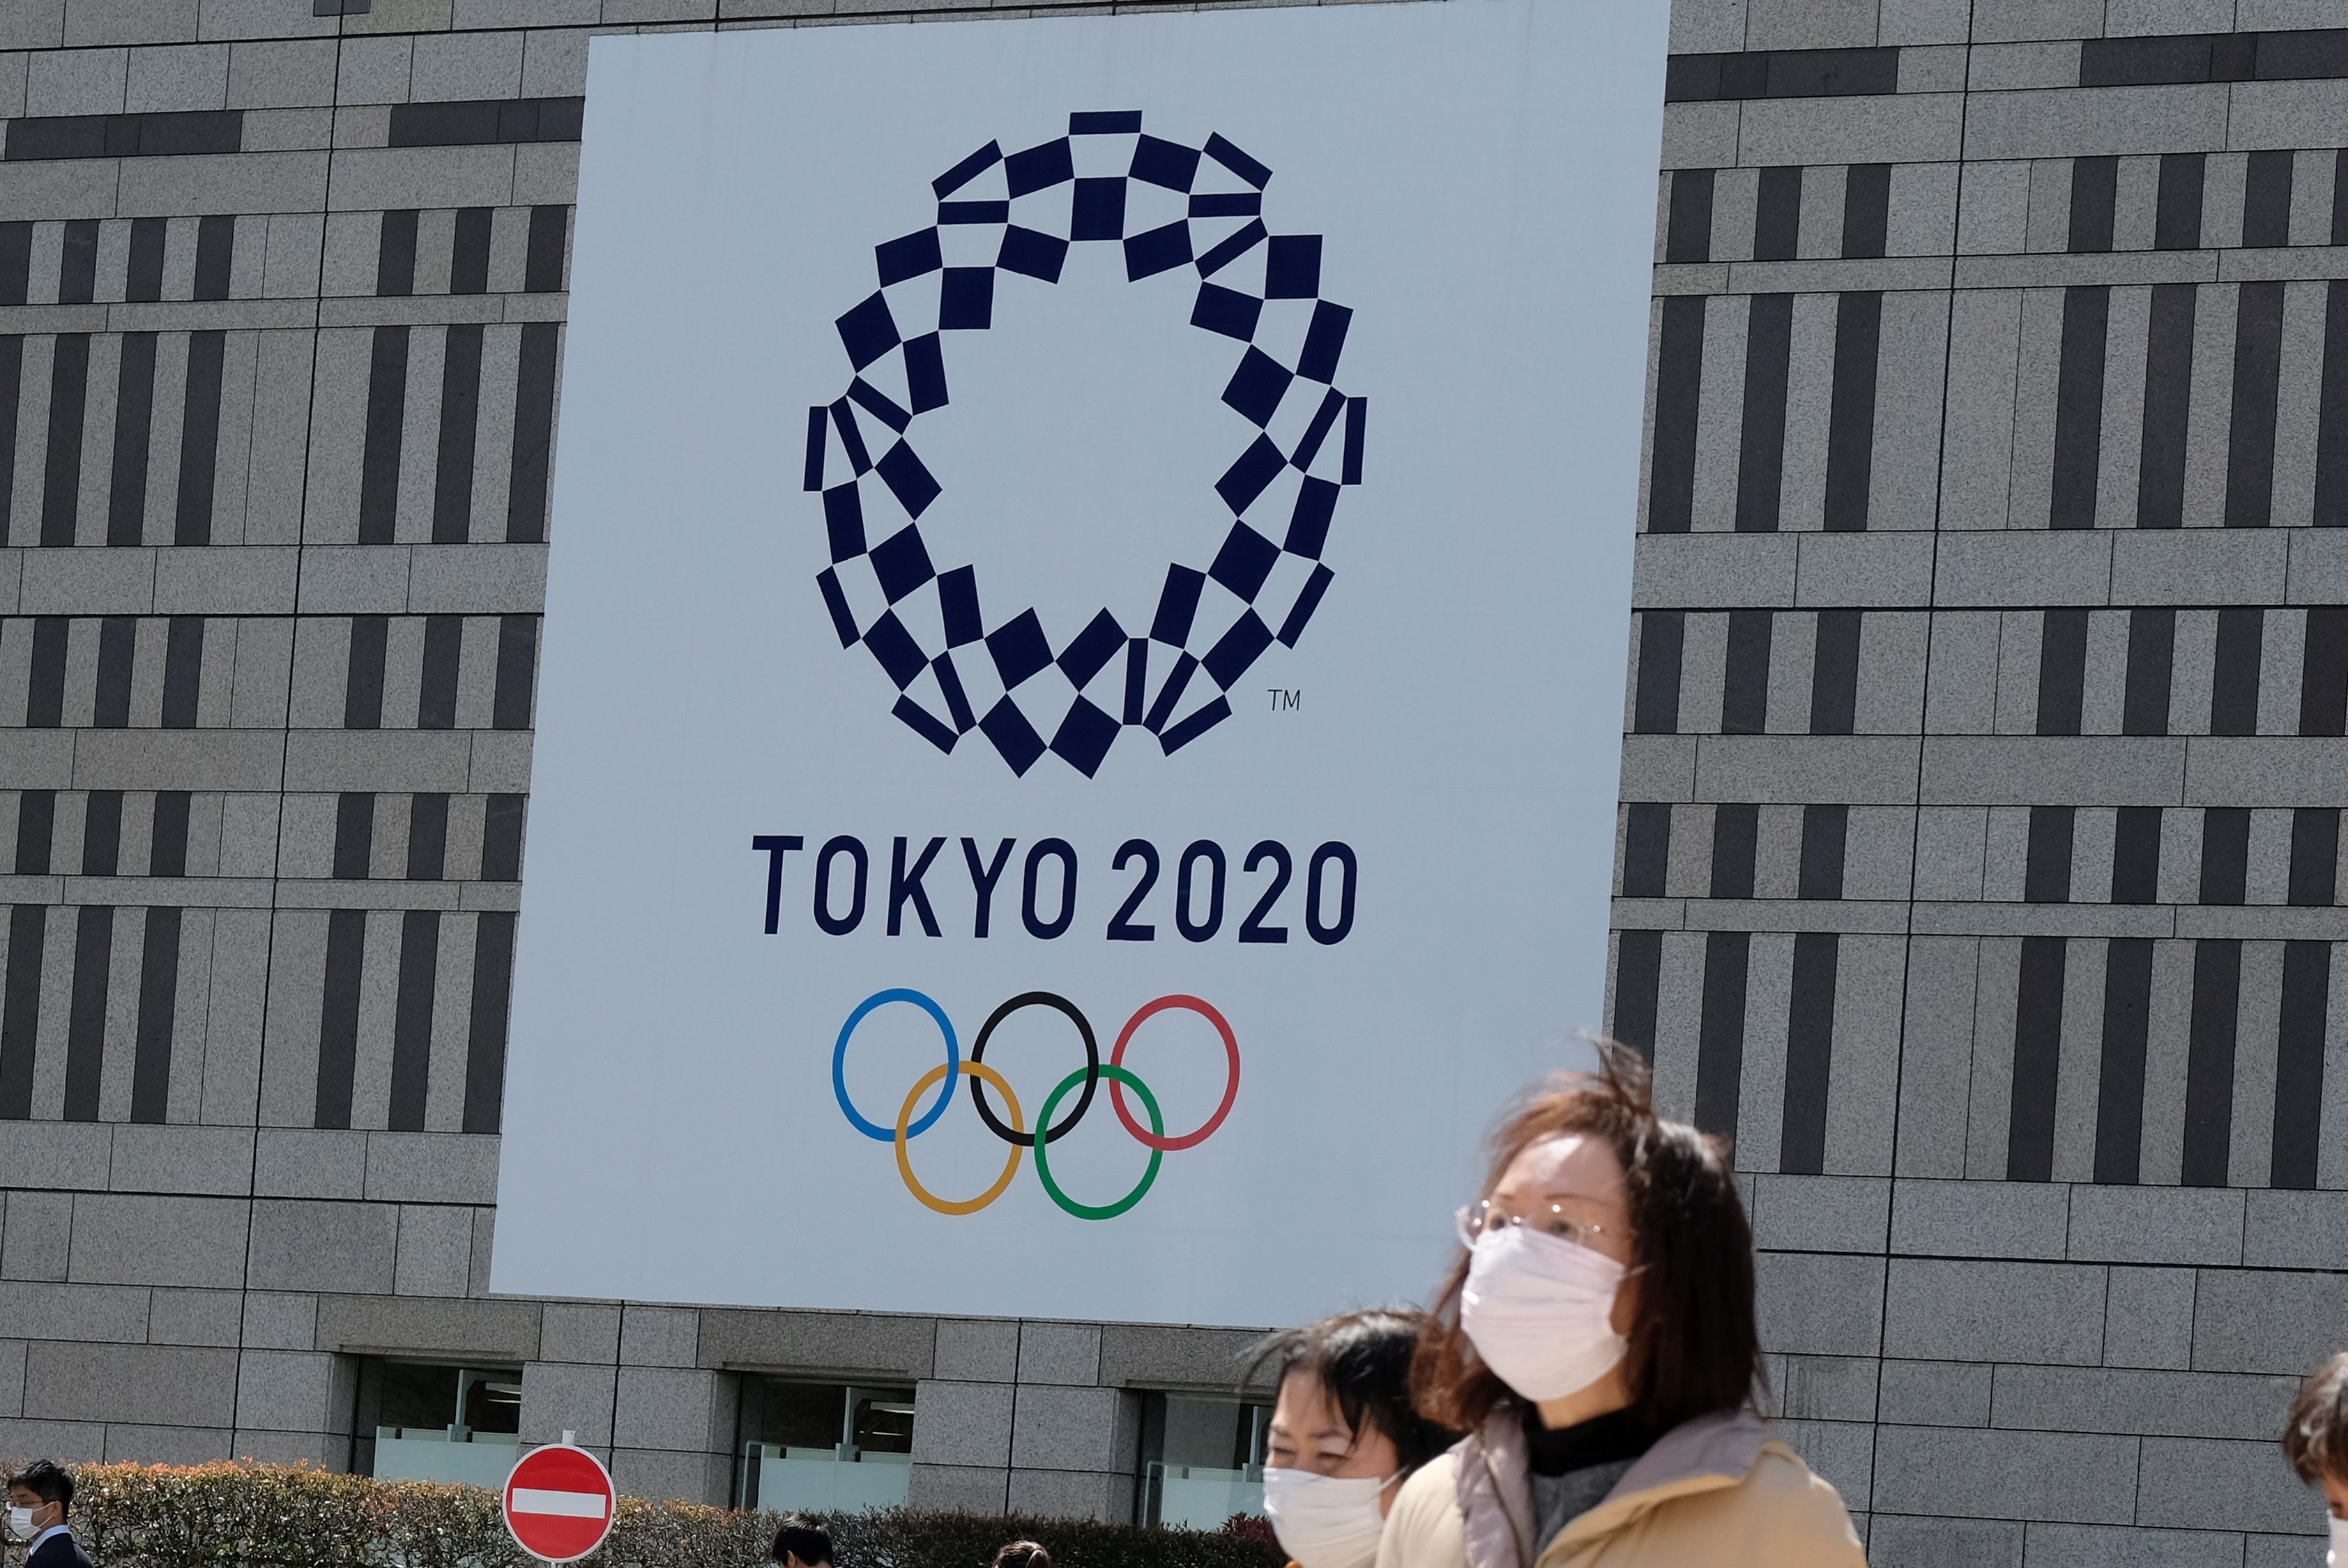 UK Authorities: Russia Had Cyber-Attack Planned for 2020 Tokyo Olympics